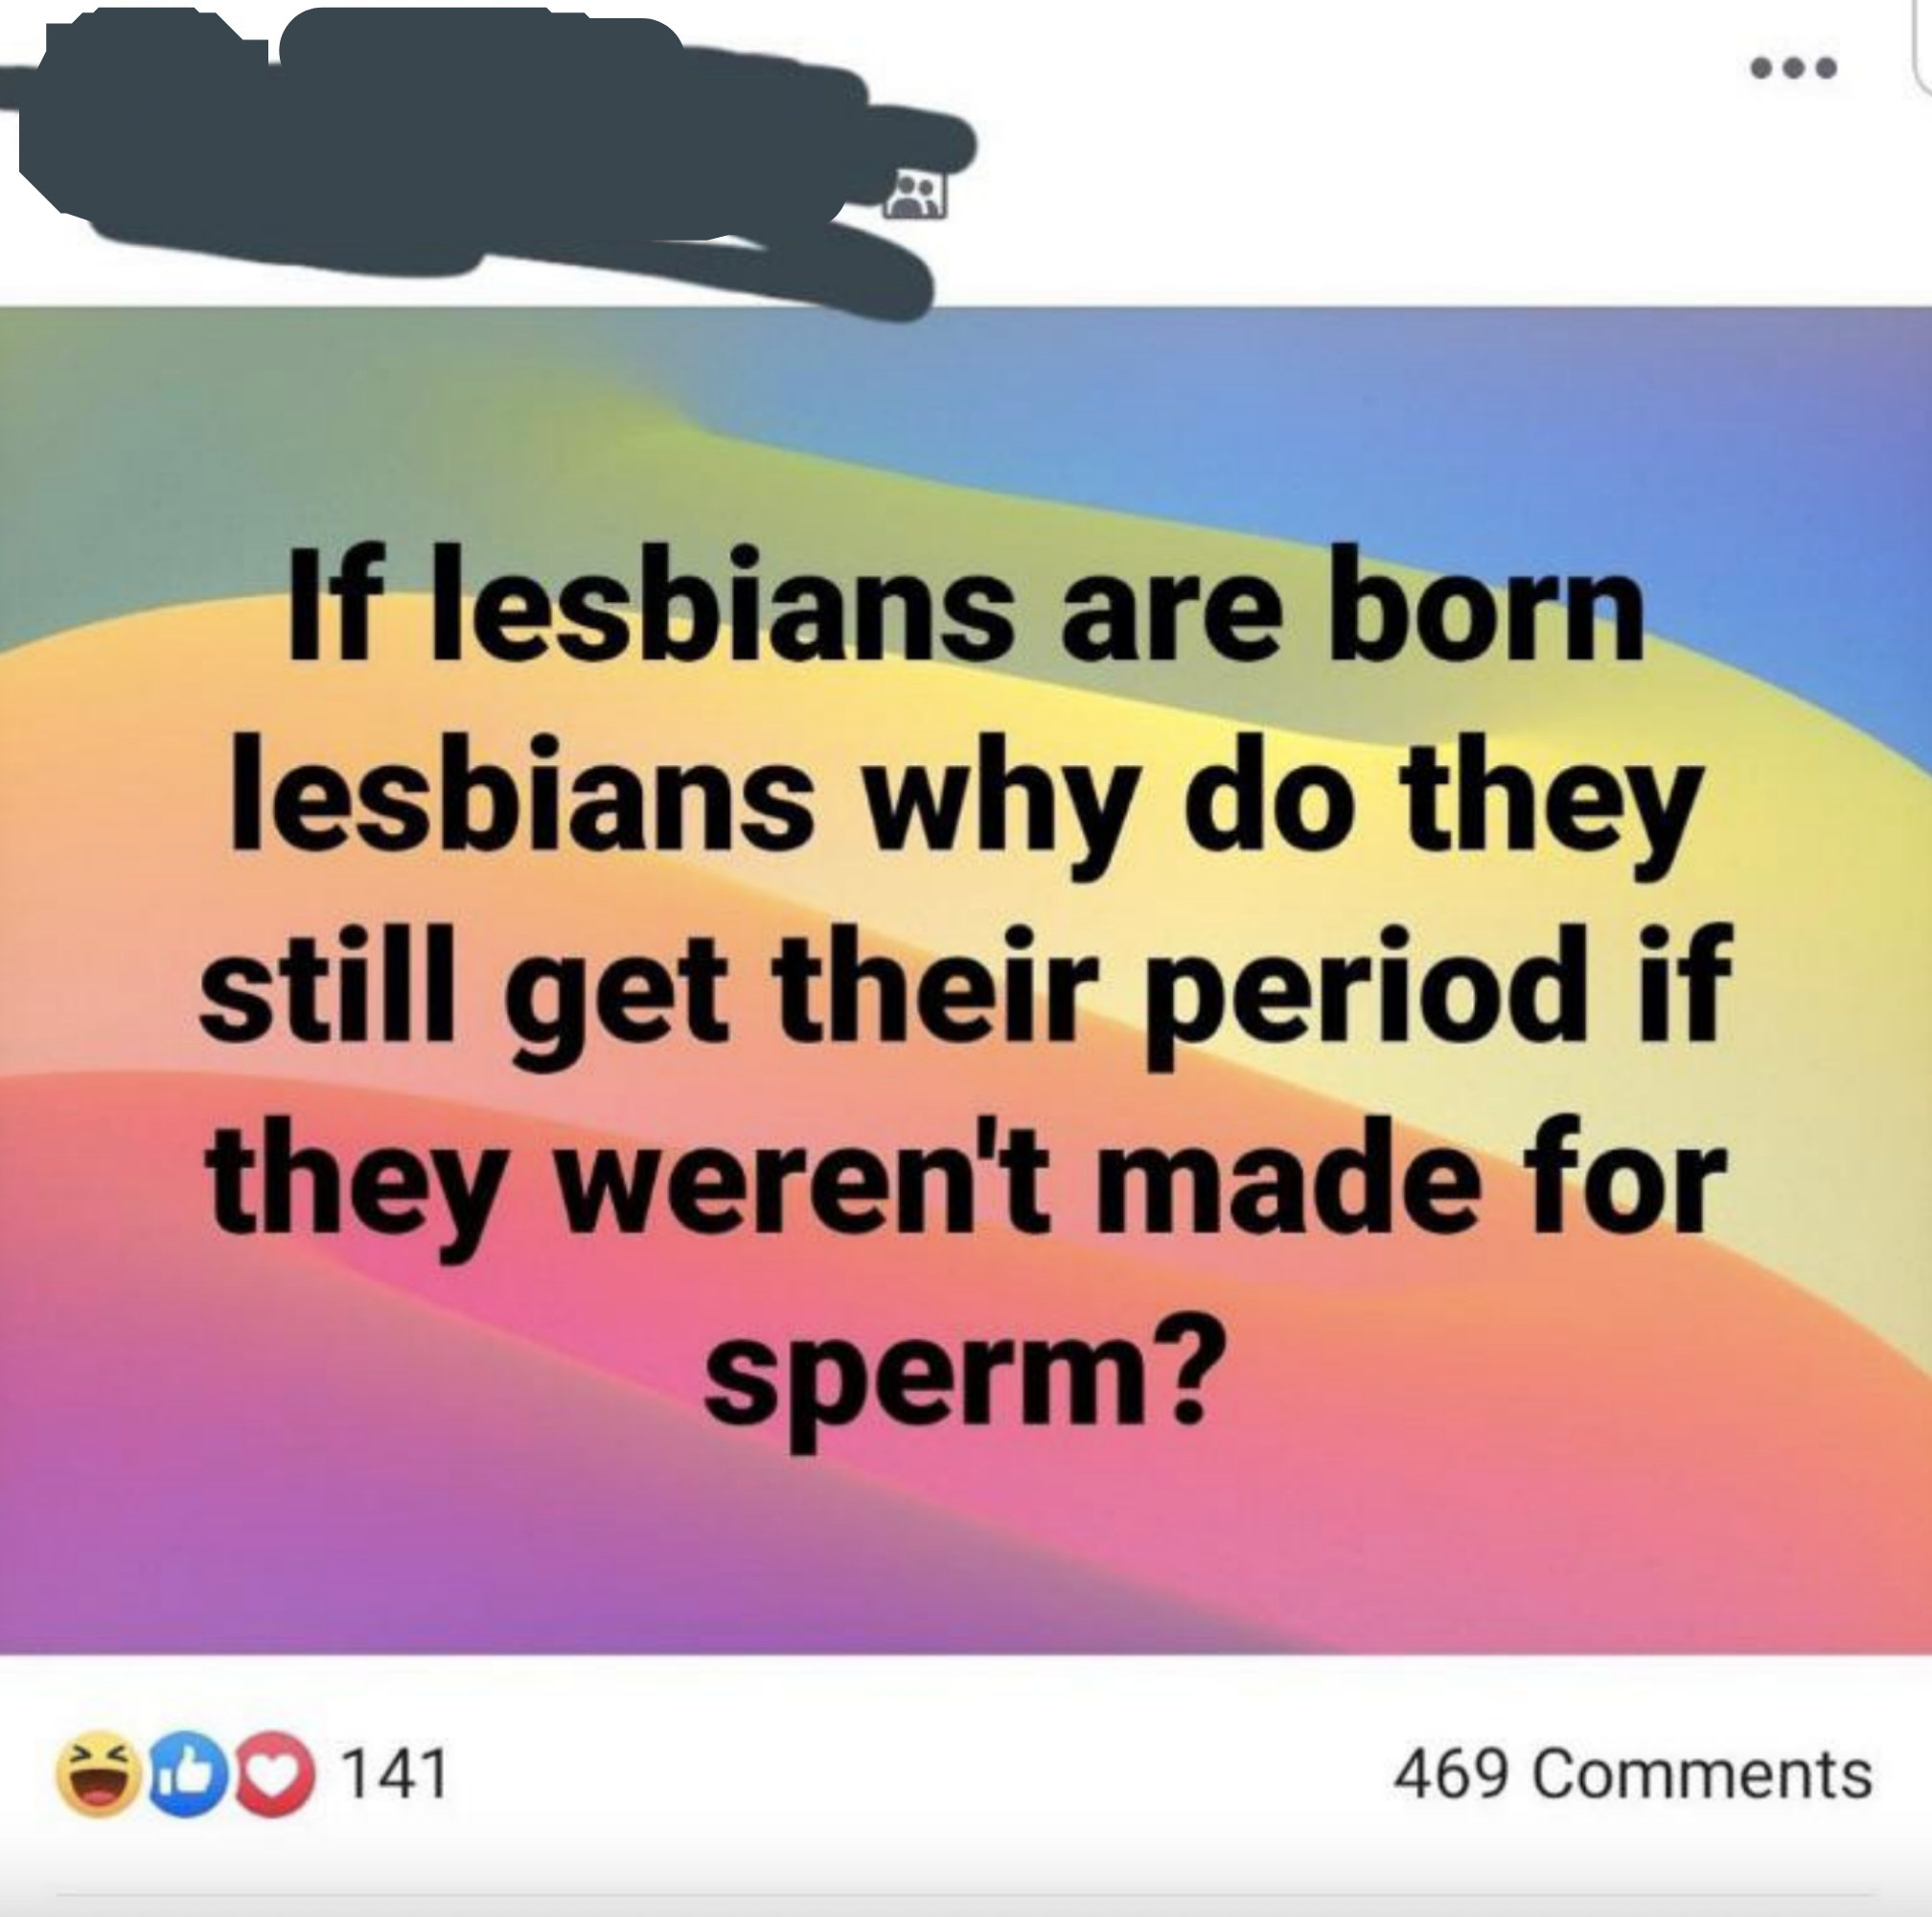 &quot;If lesbians are born lesbians why do they still get their period if they weren&#x27;t made for sperm?&quot;